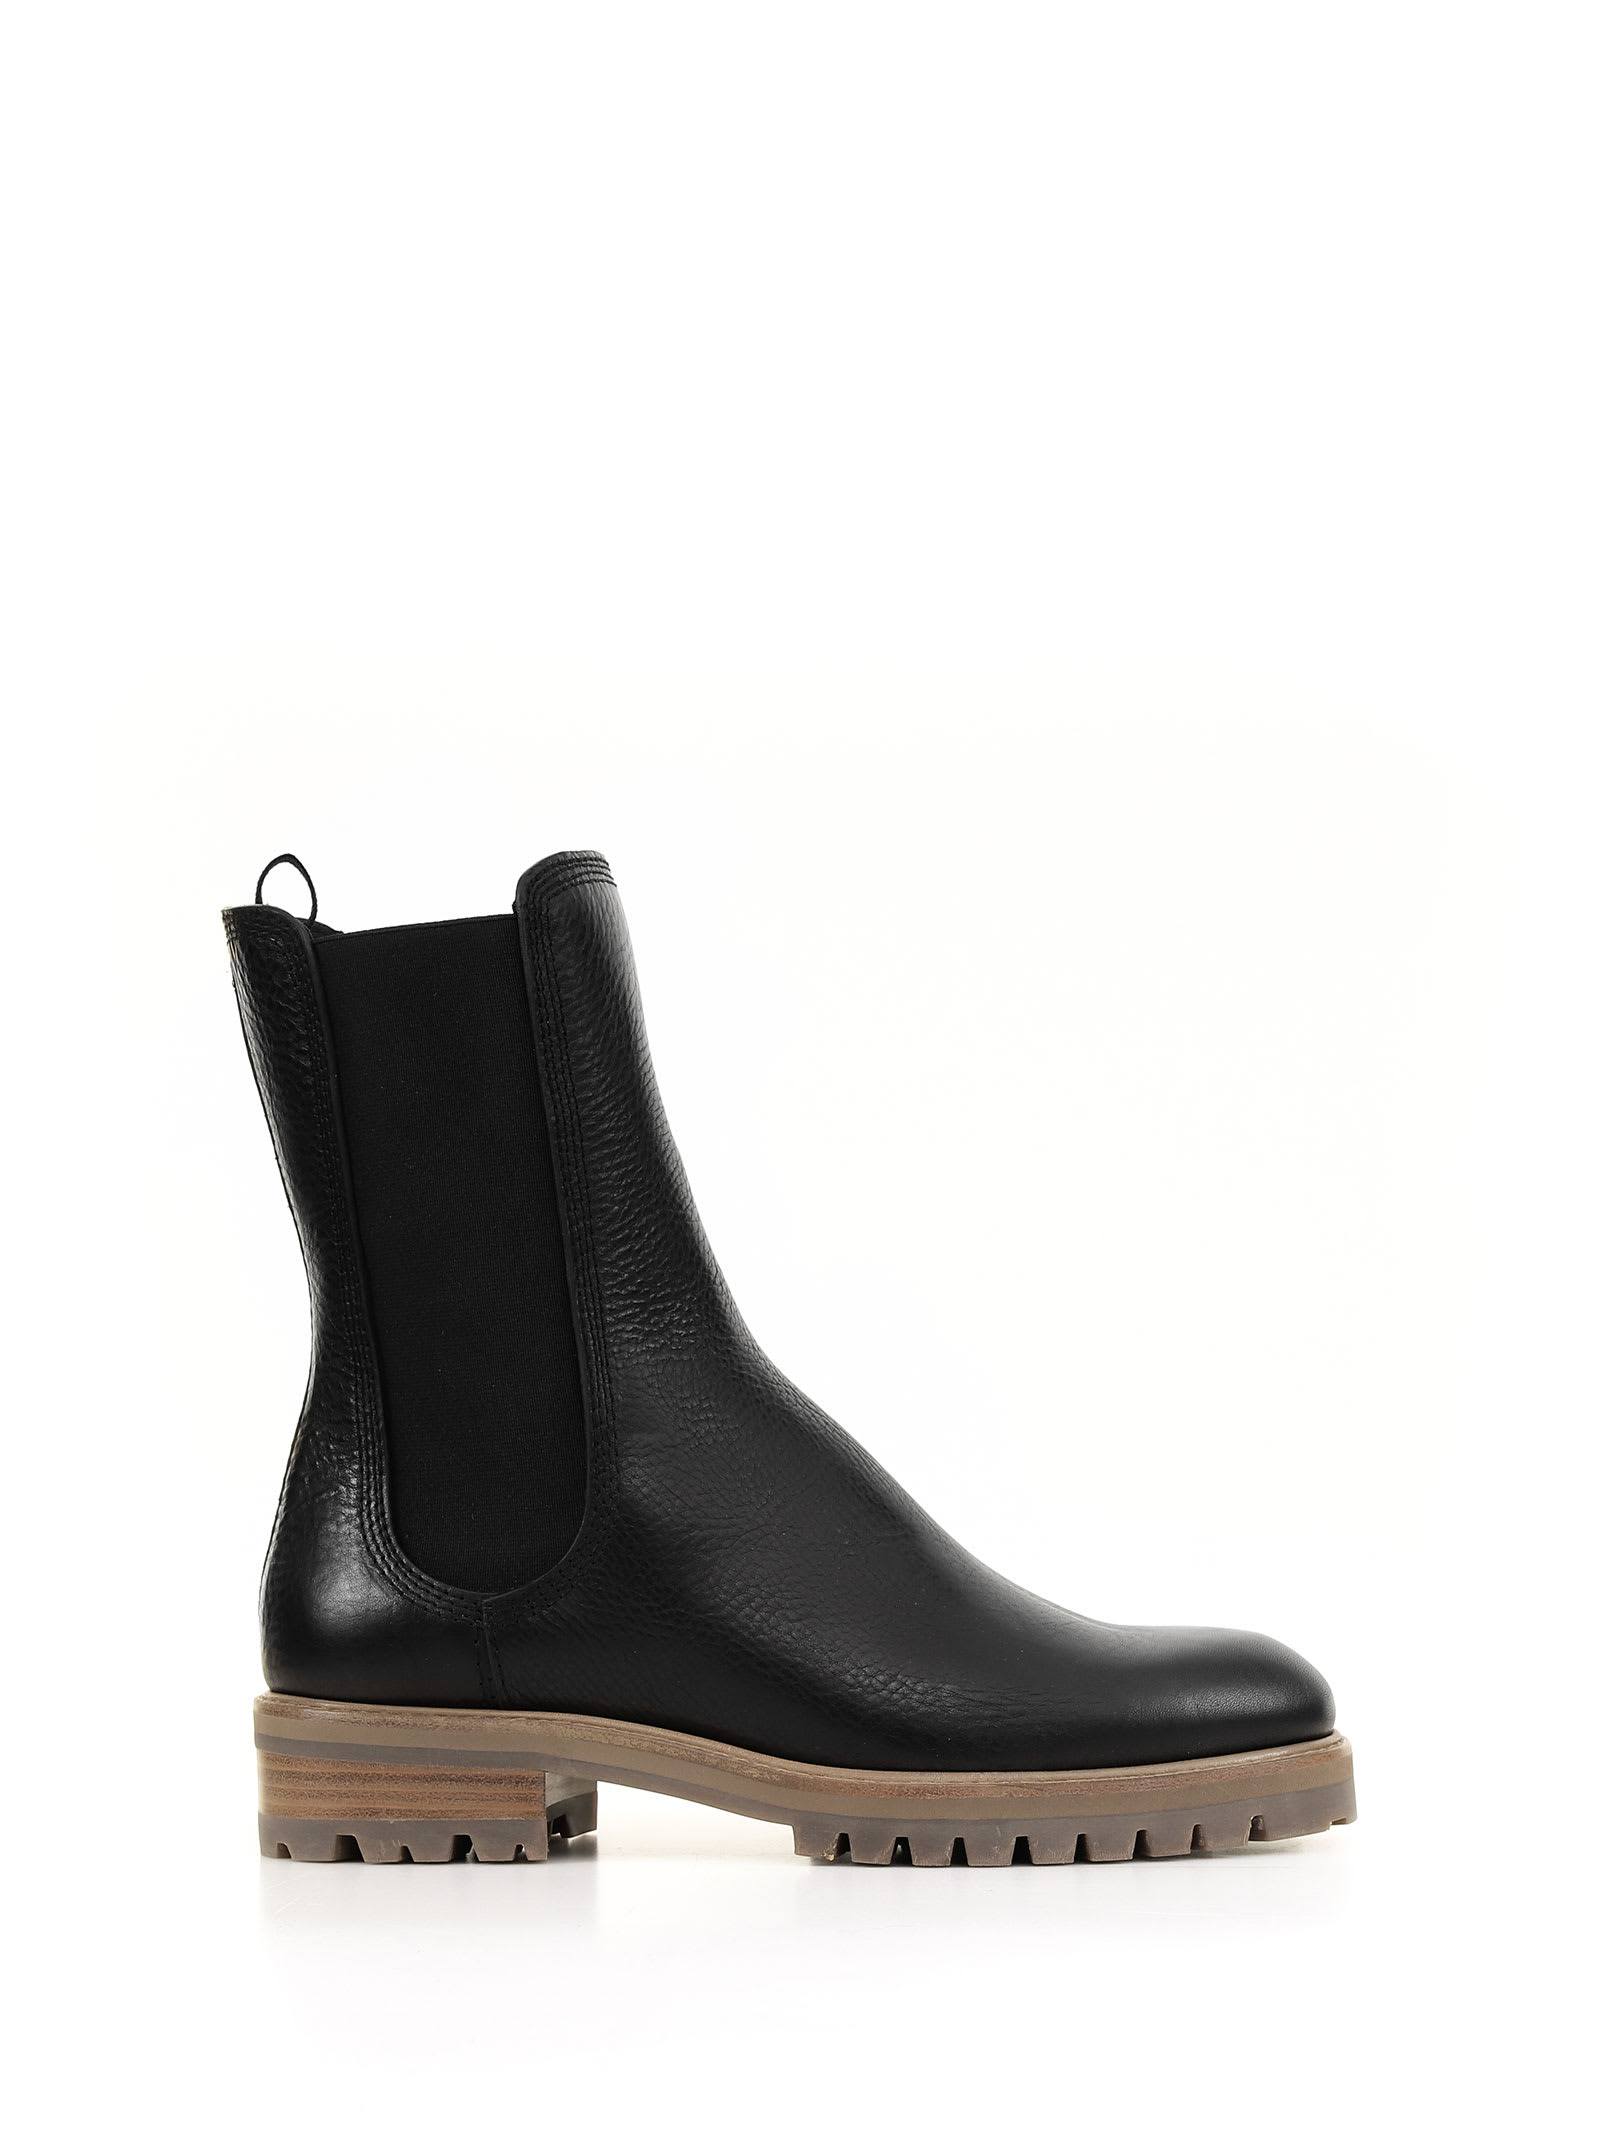 Pedro Garcia Lug Sole Smooth Leather Ankle Boot